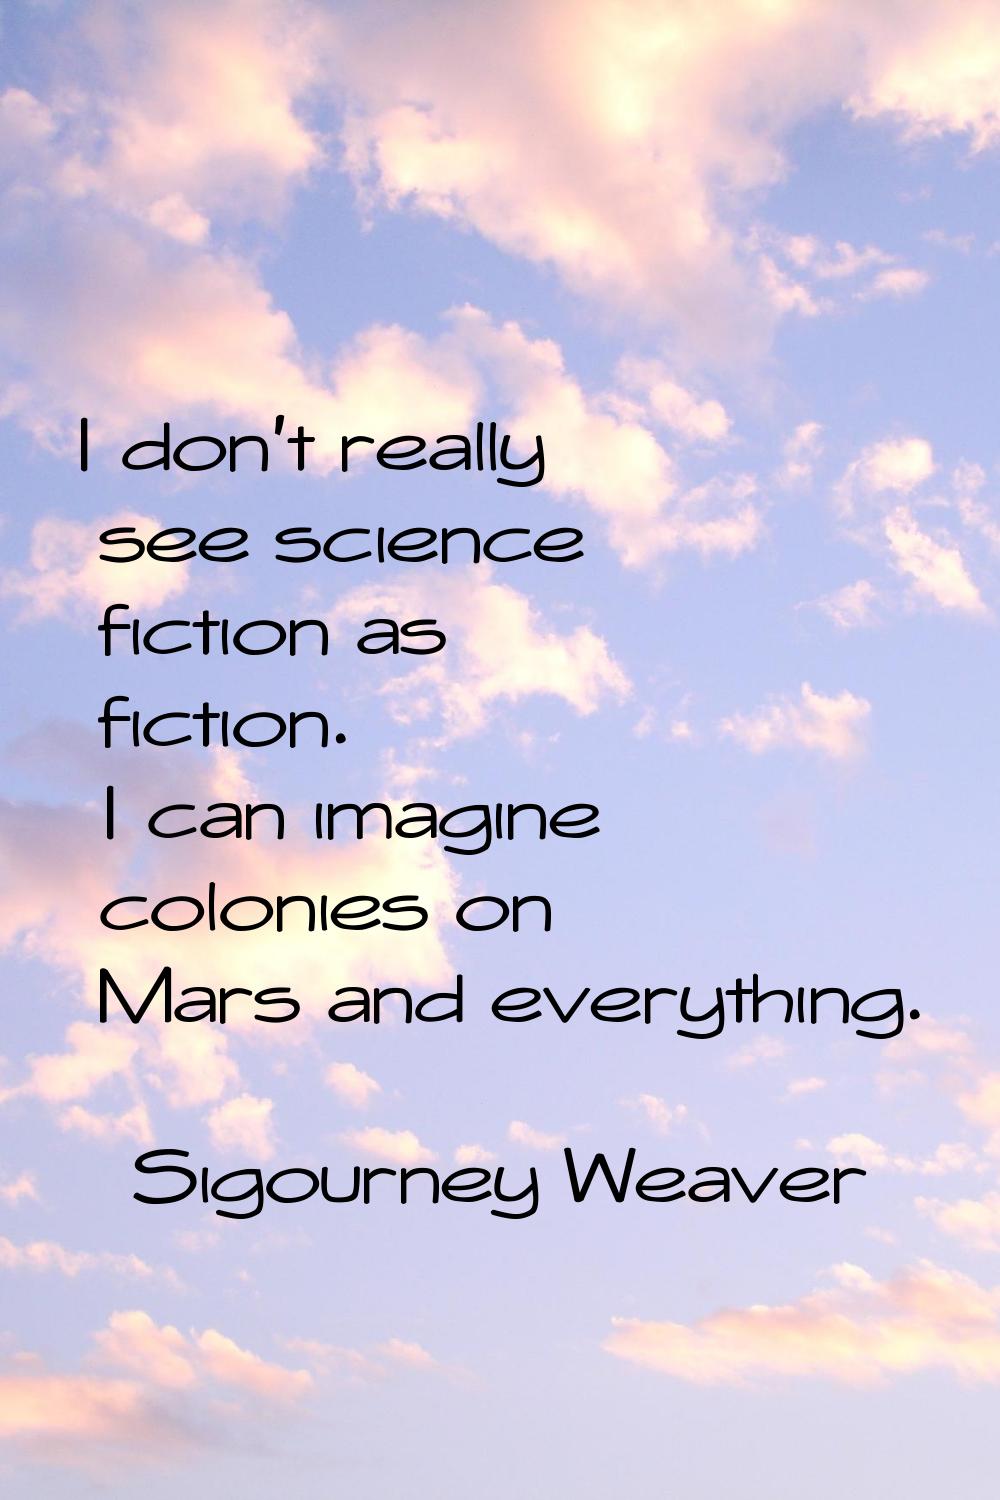 I don't really see science fiction as fiction. I can imagine colonies on Mars and everything.